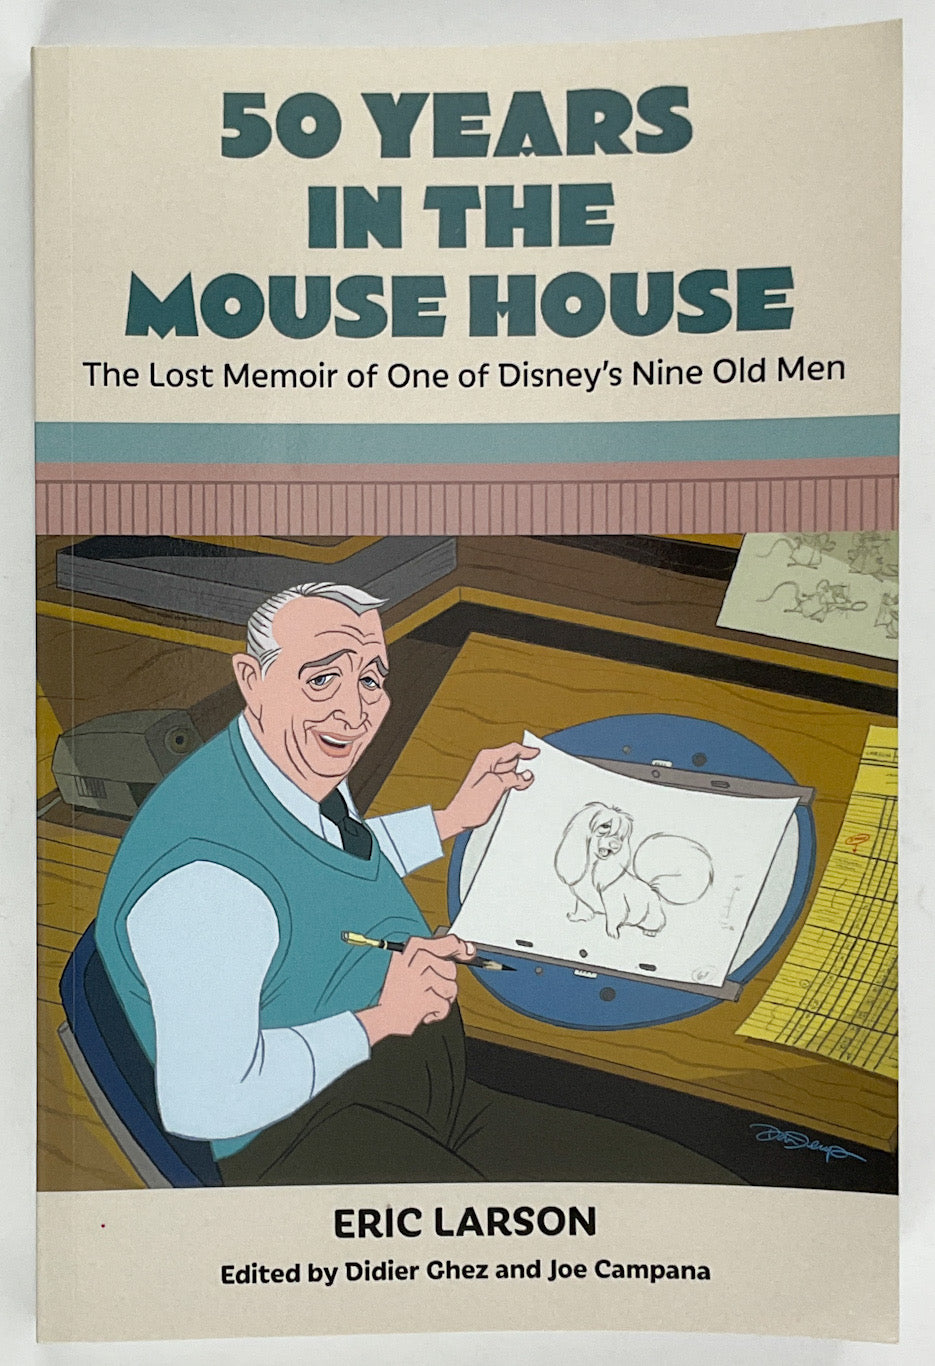 50 Years in the Mouse House: The Lost Memoir of One of Disney's Nine Old Men